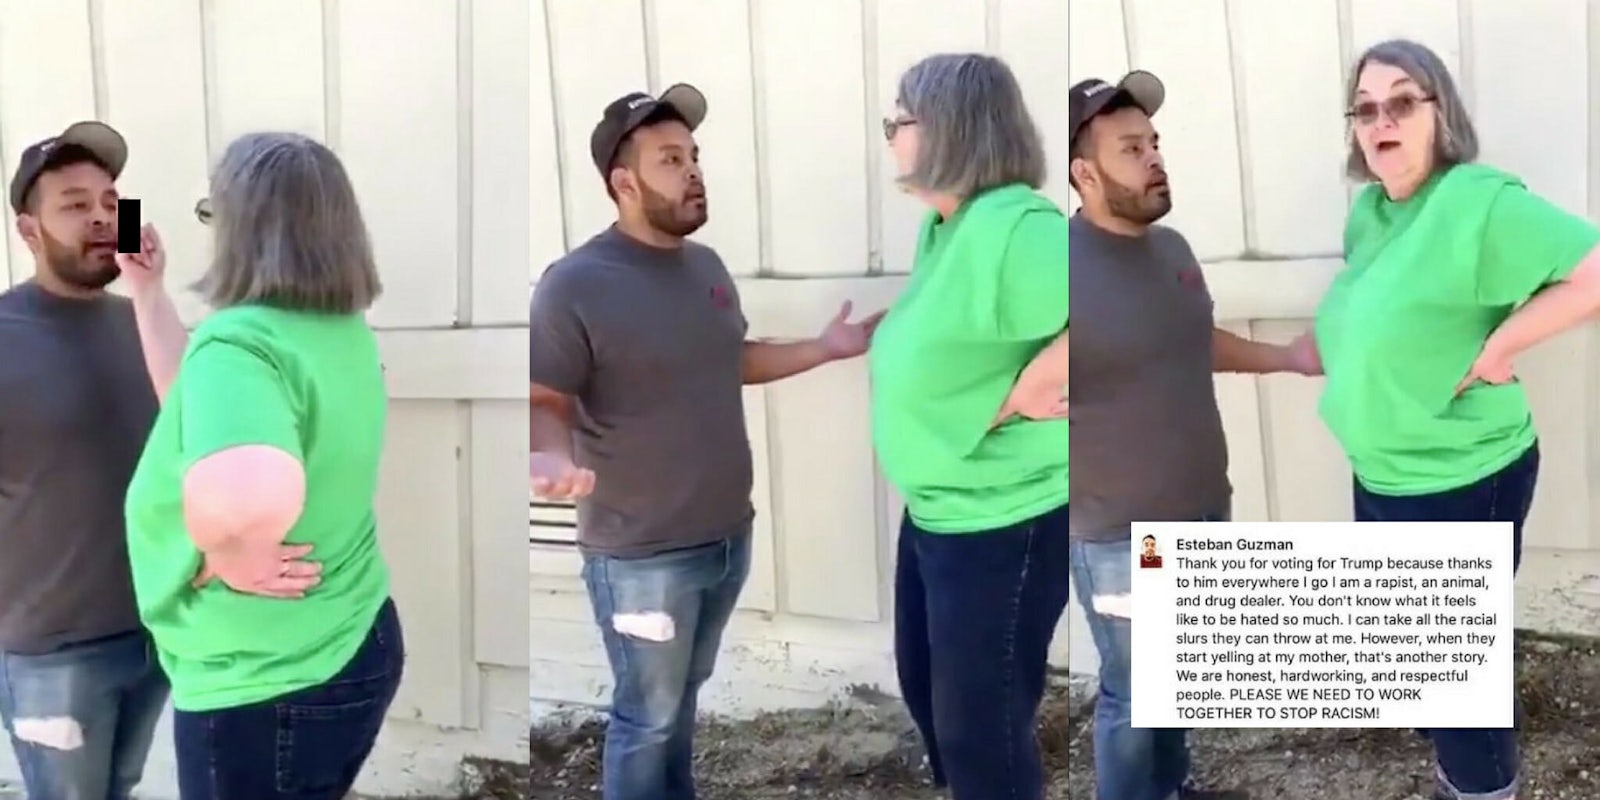 A white woman gives a Mexican landscaper the middle finger before calling him a rapist and drug dealer.